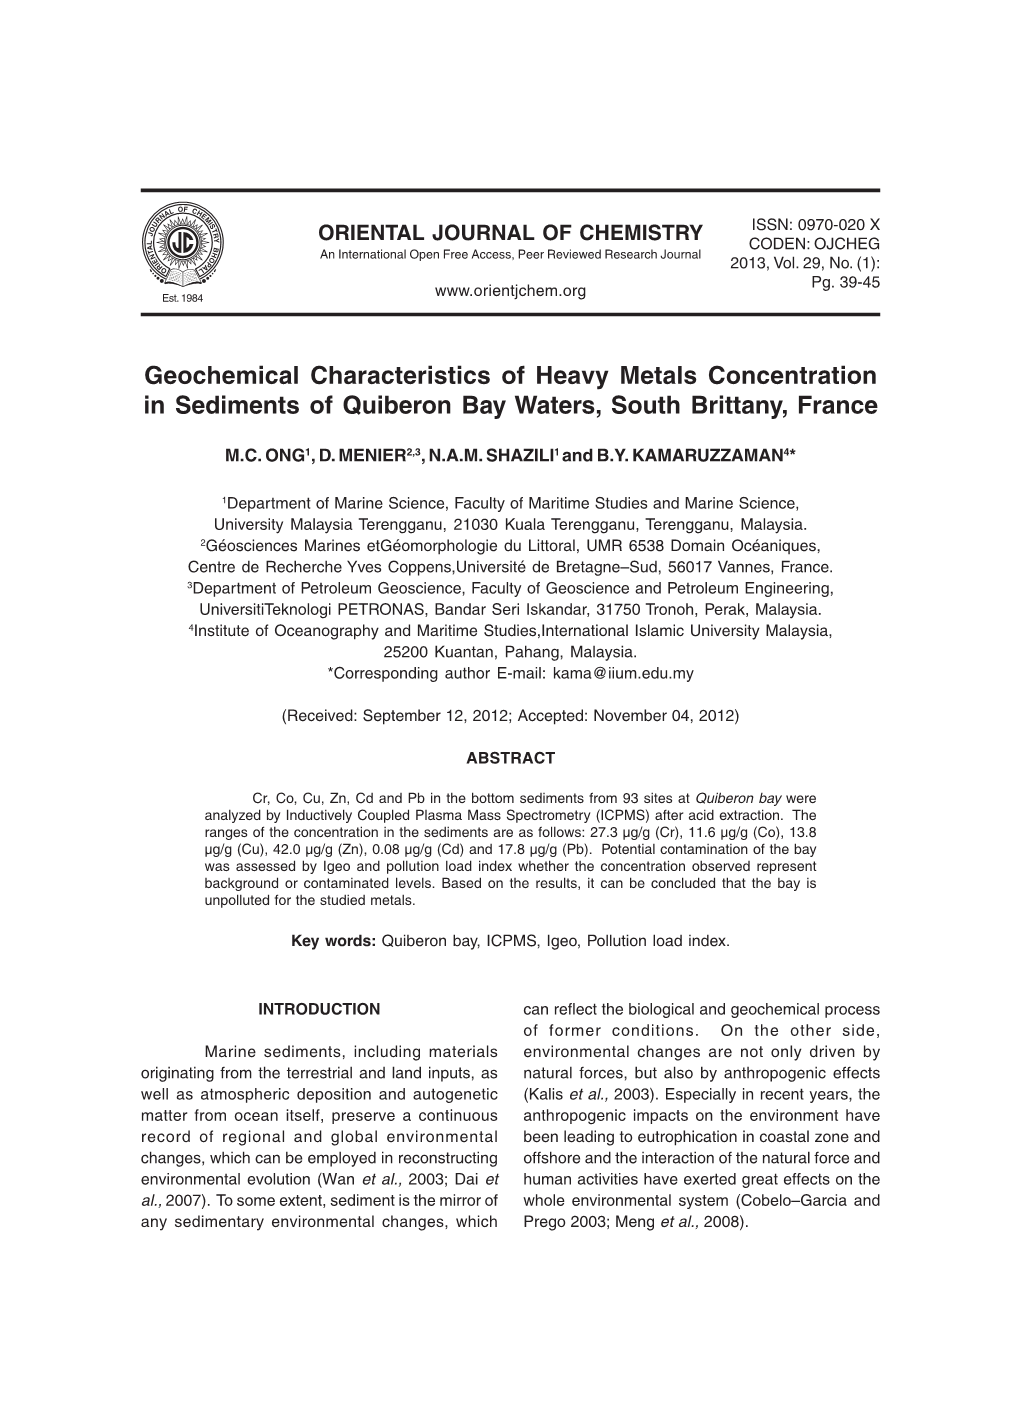 Geochemical Characteristics of Heavy Metals Concentration in Sediments of Quiberon Bay Waters, South Brittany, France